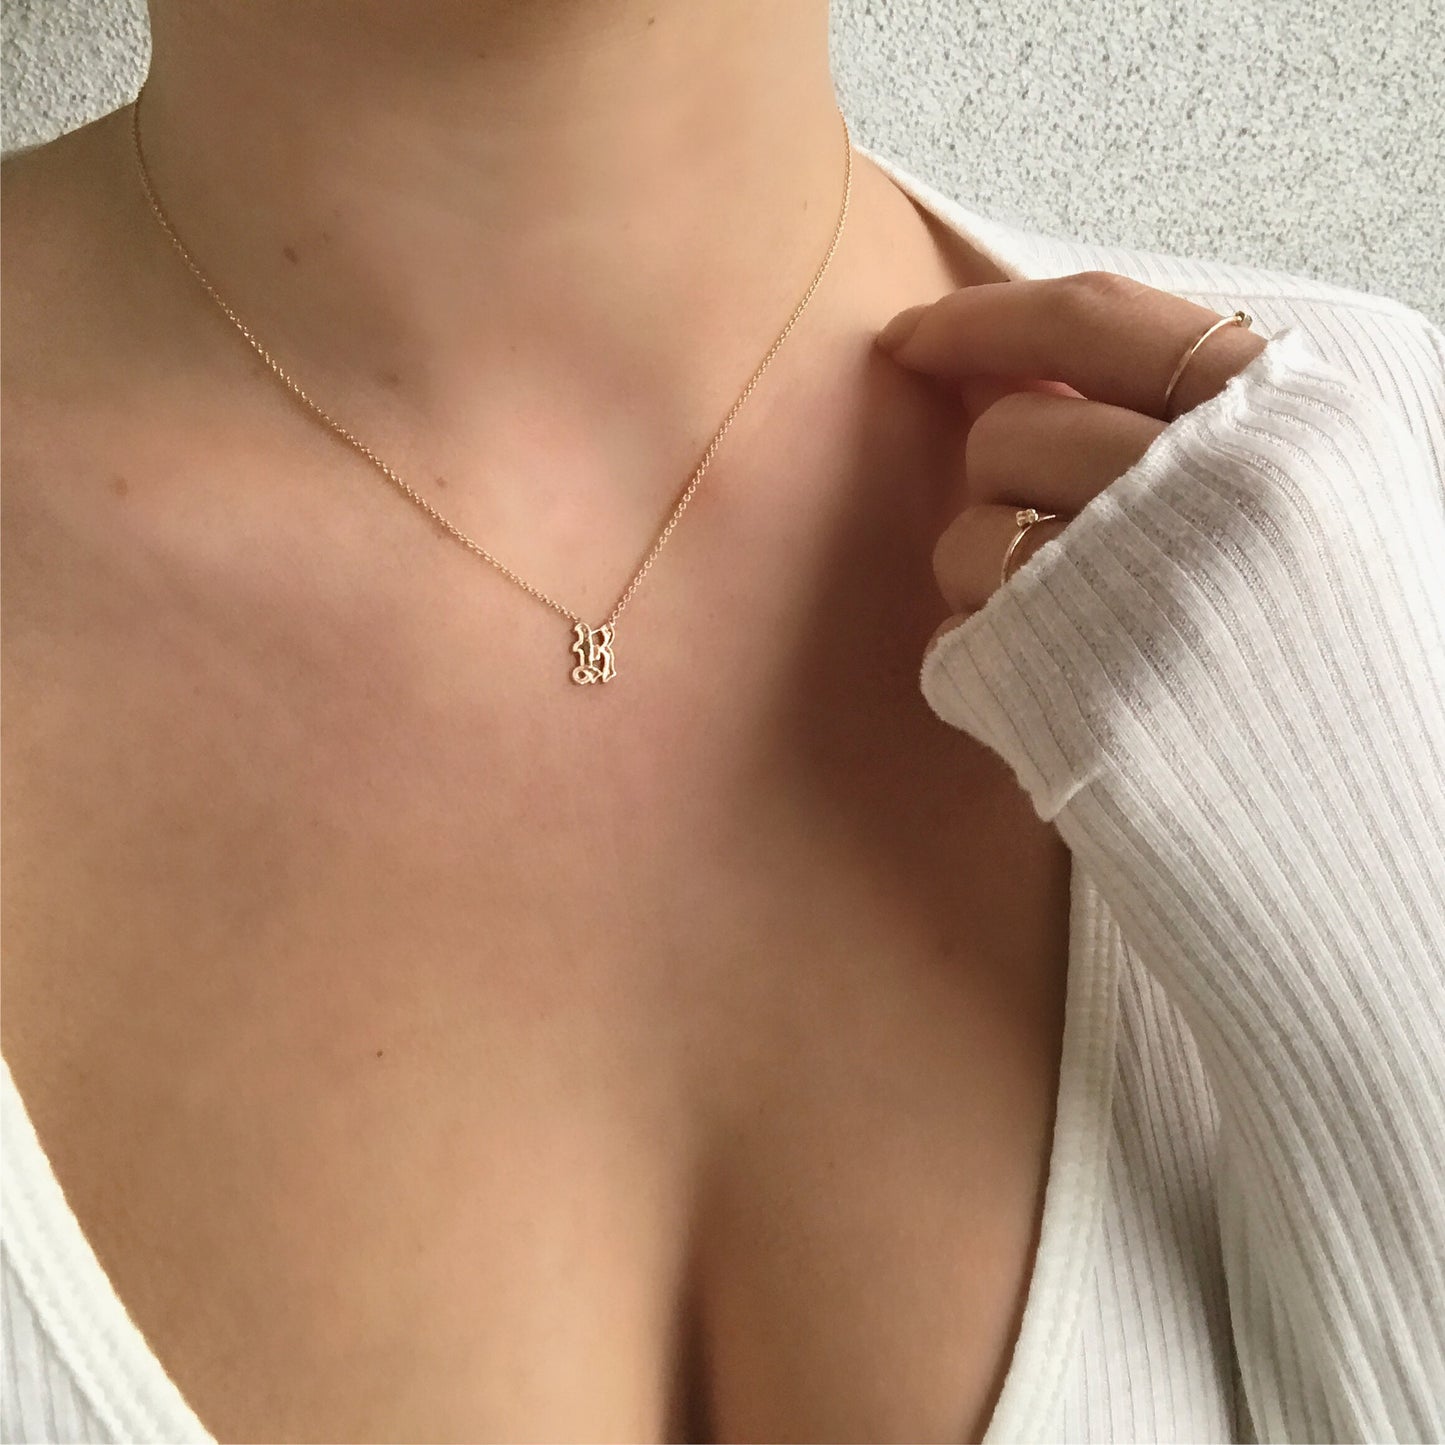 Rebel Necklace {Old English Initial} Solid 14K Gold